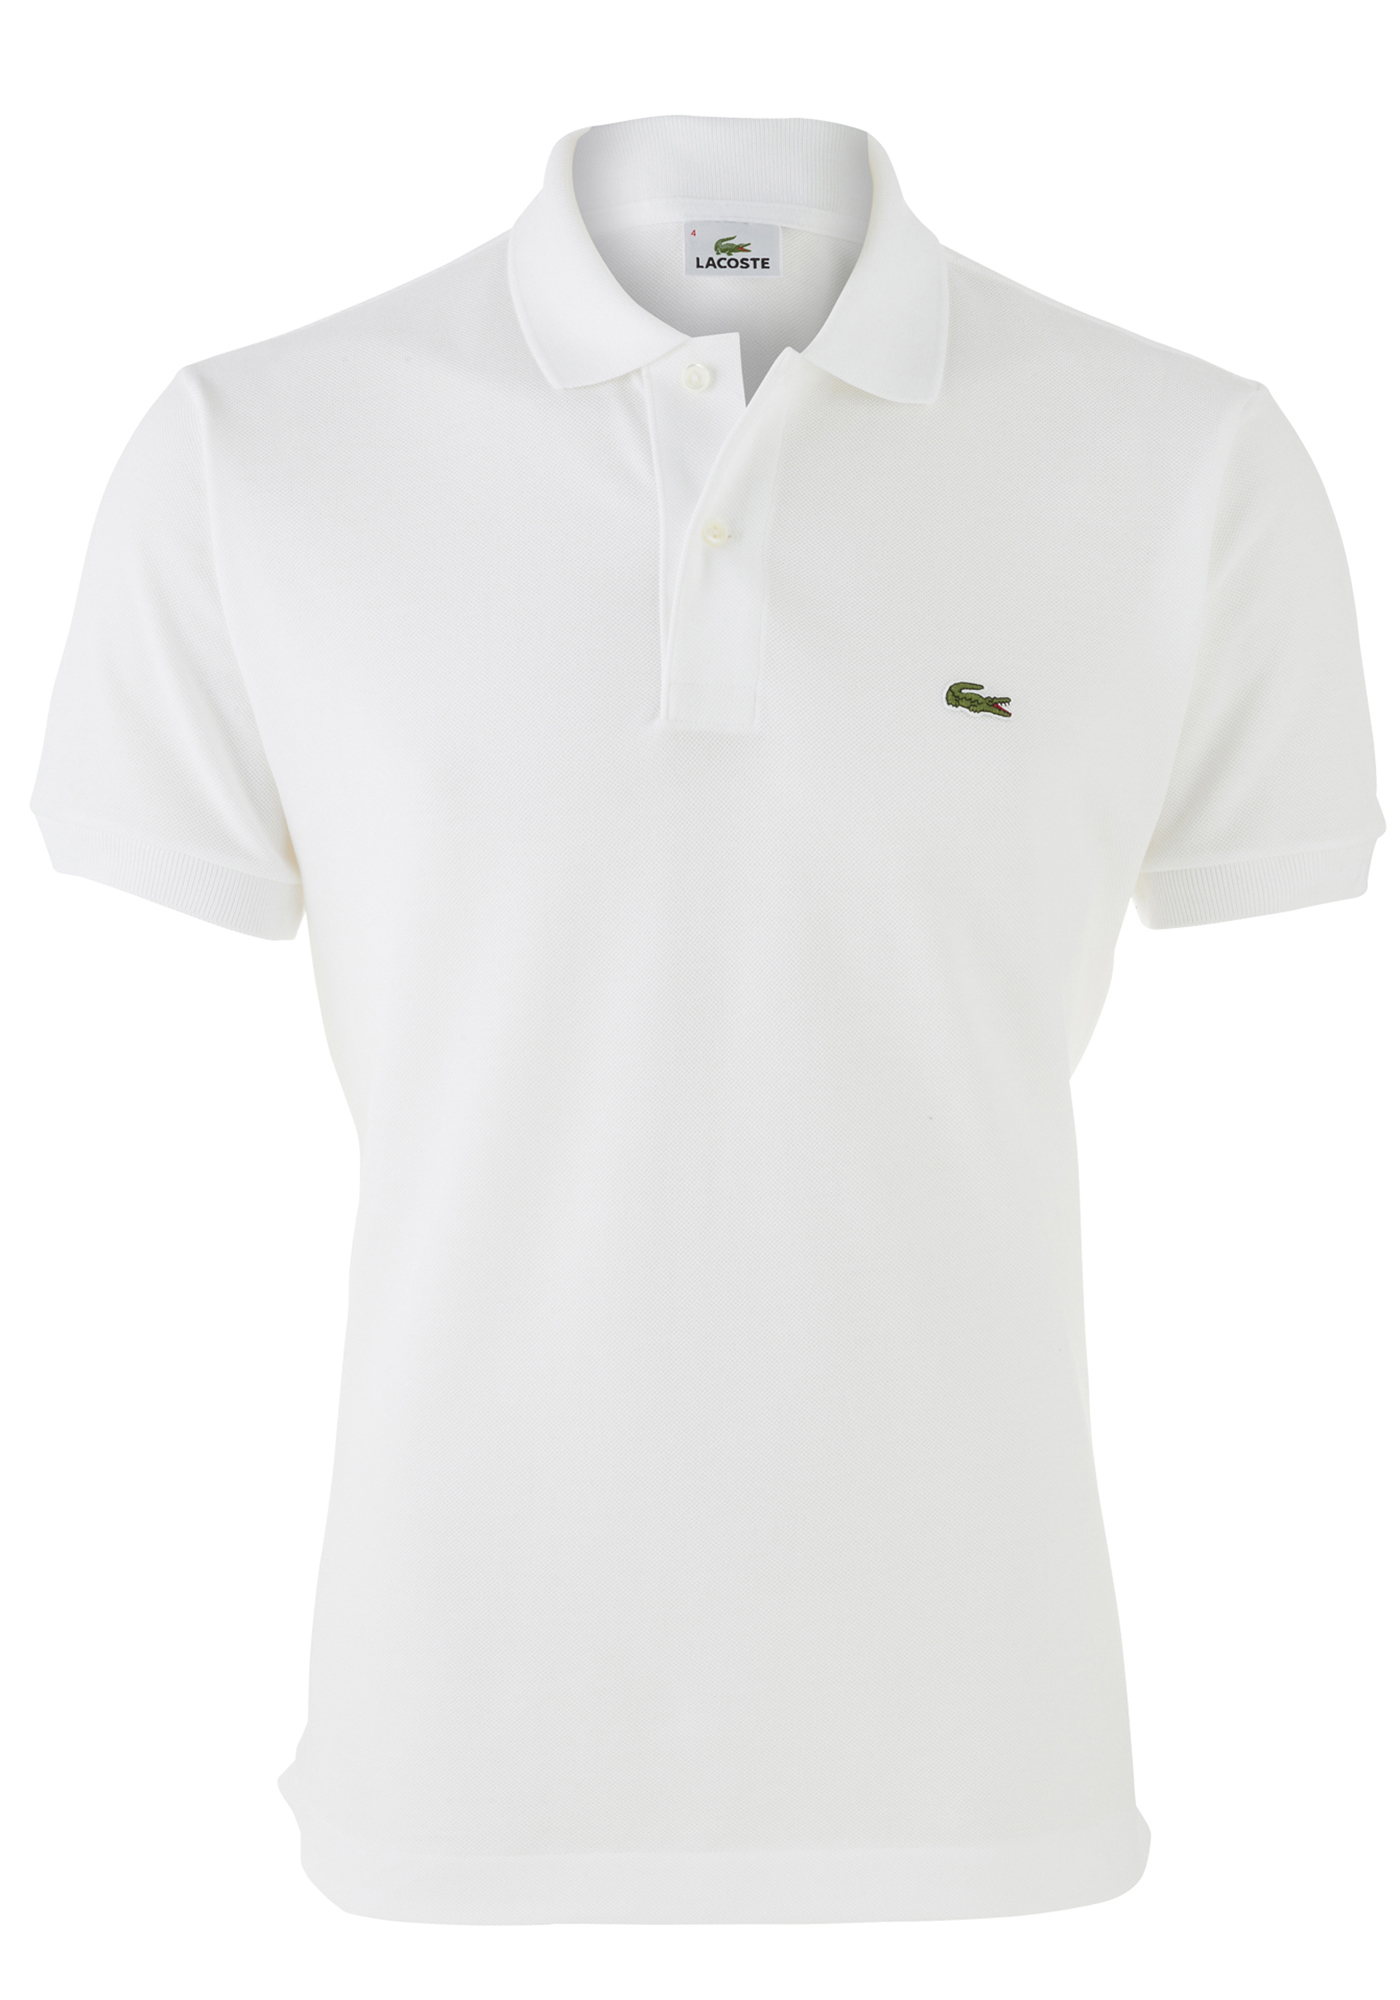 Mark analyseren Orkaan Lacoste Classic Fit polo, wit - Gratis bezorgd